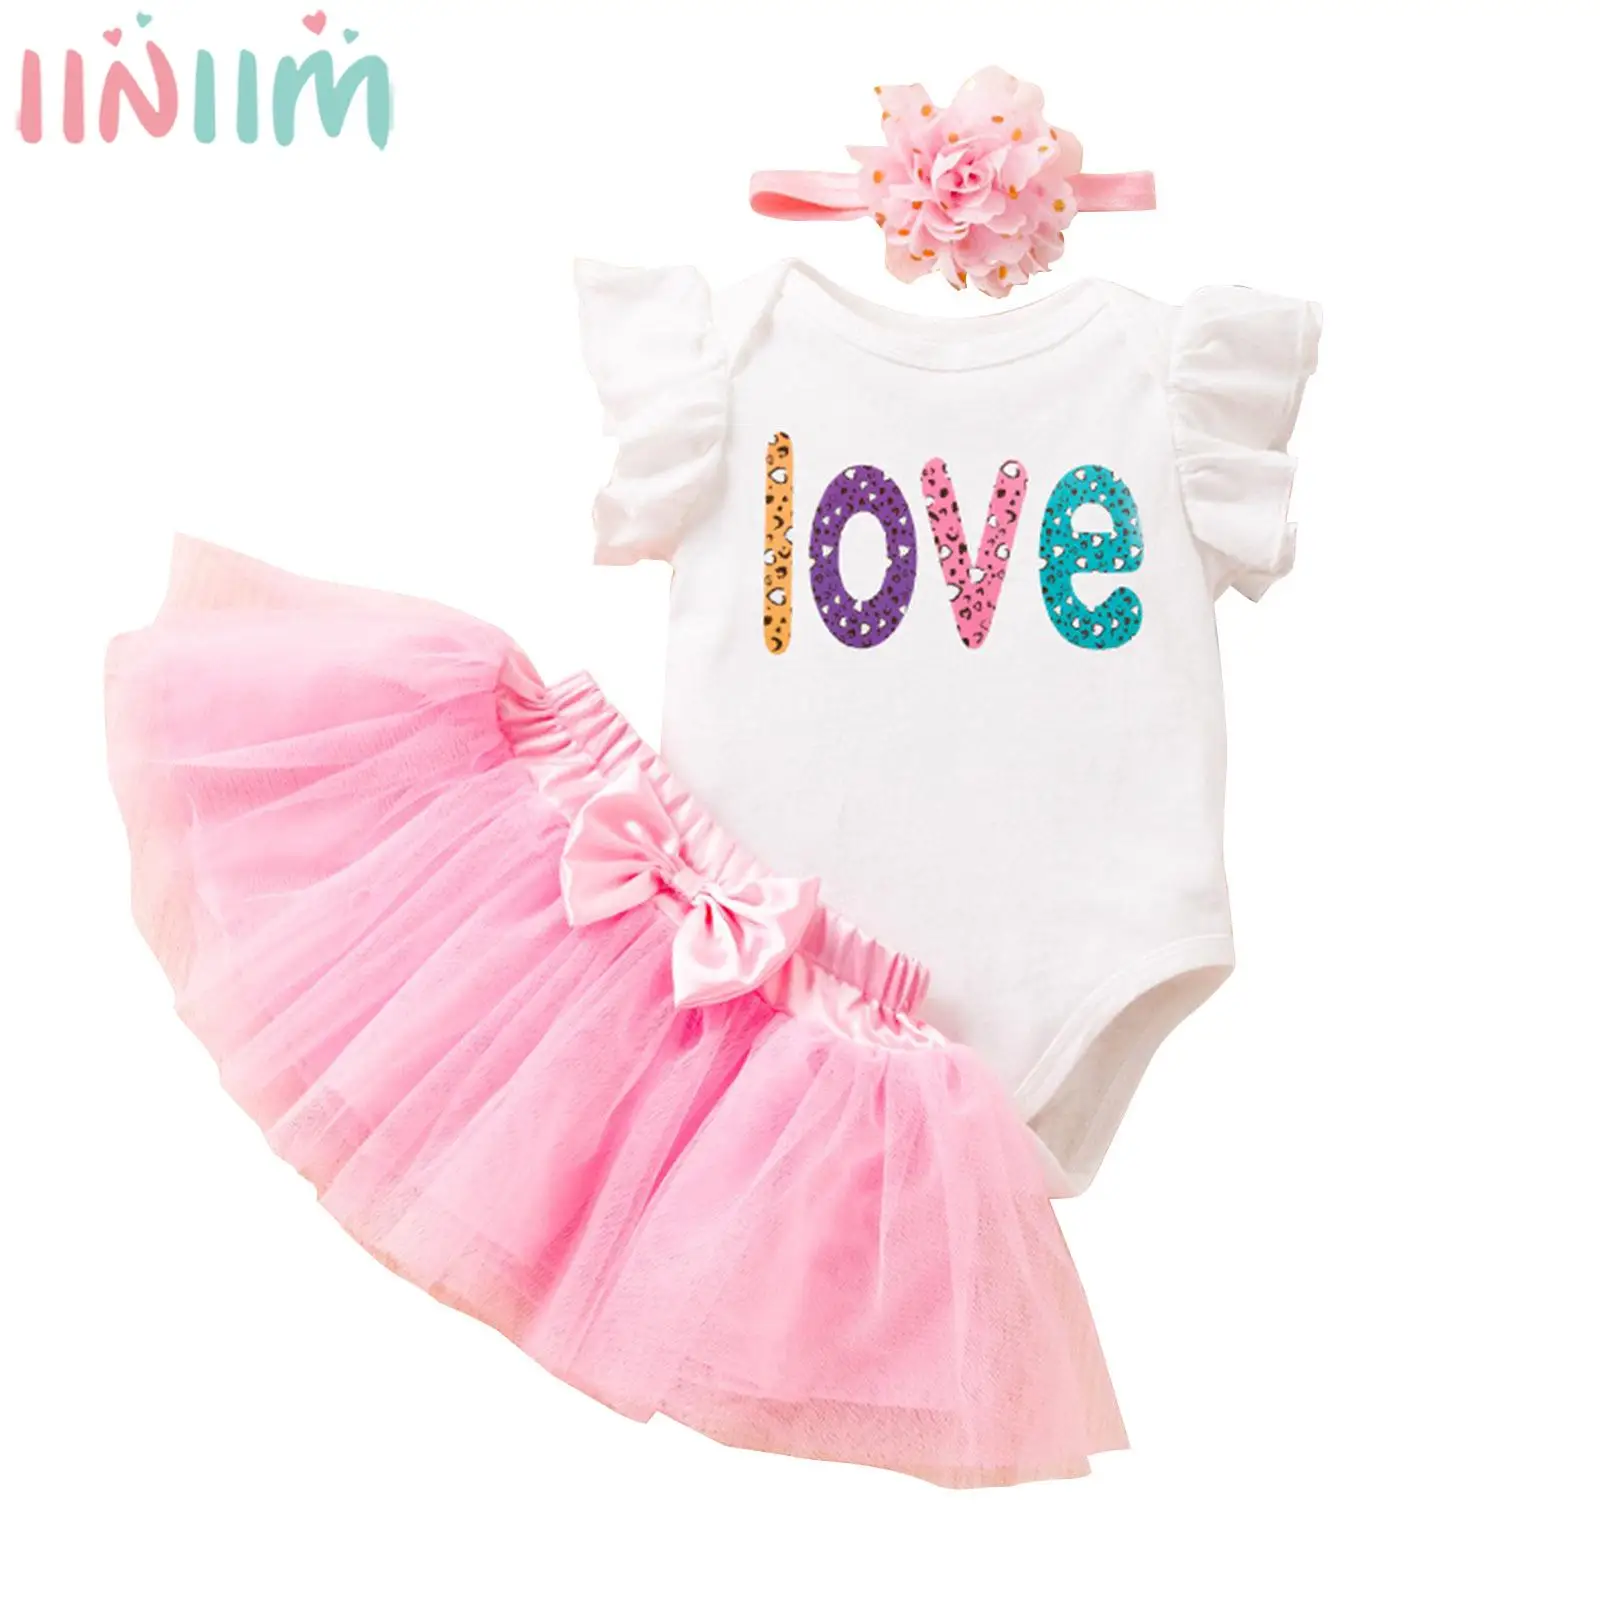 

Baby Girls Valentine Day Outfits Flying Sleeve Letter Print Romper with Tutu Princess Skirt Headband for Birthday Baptism Party